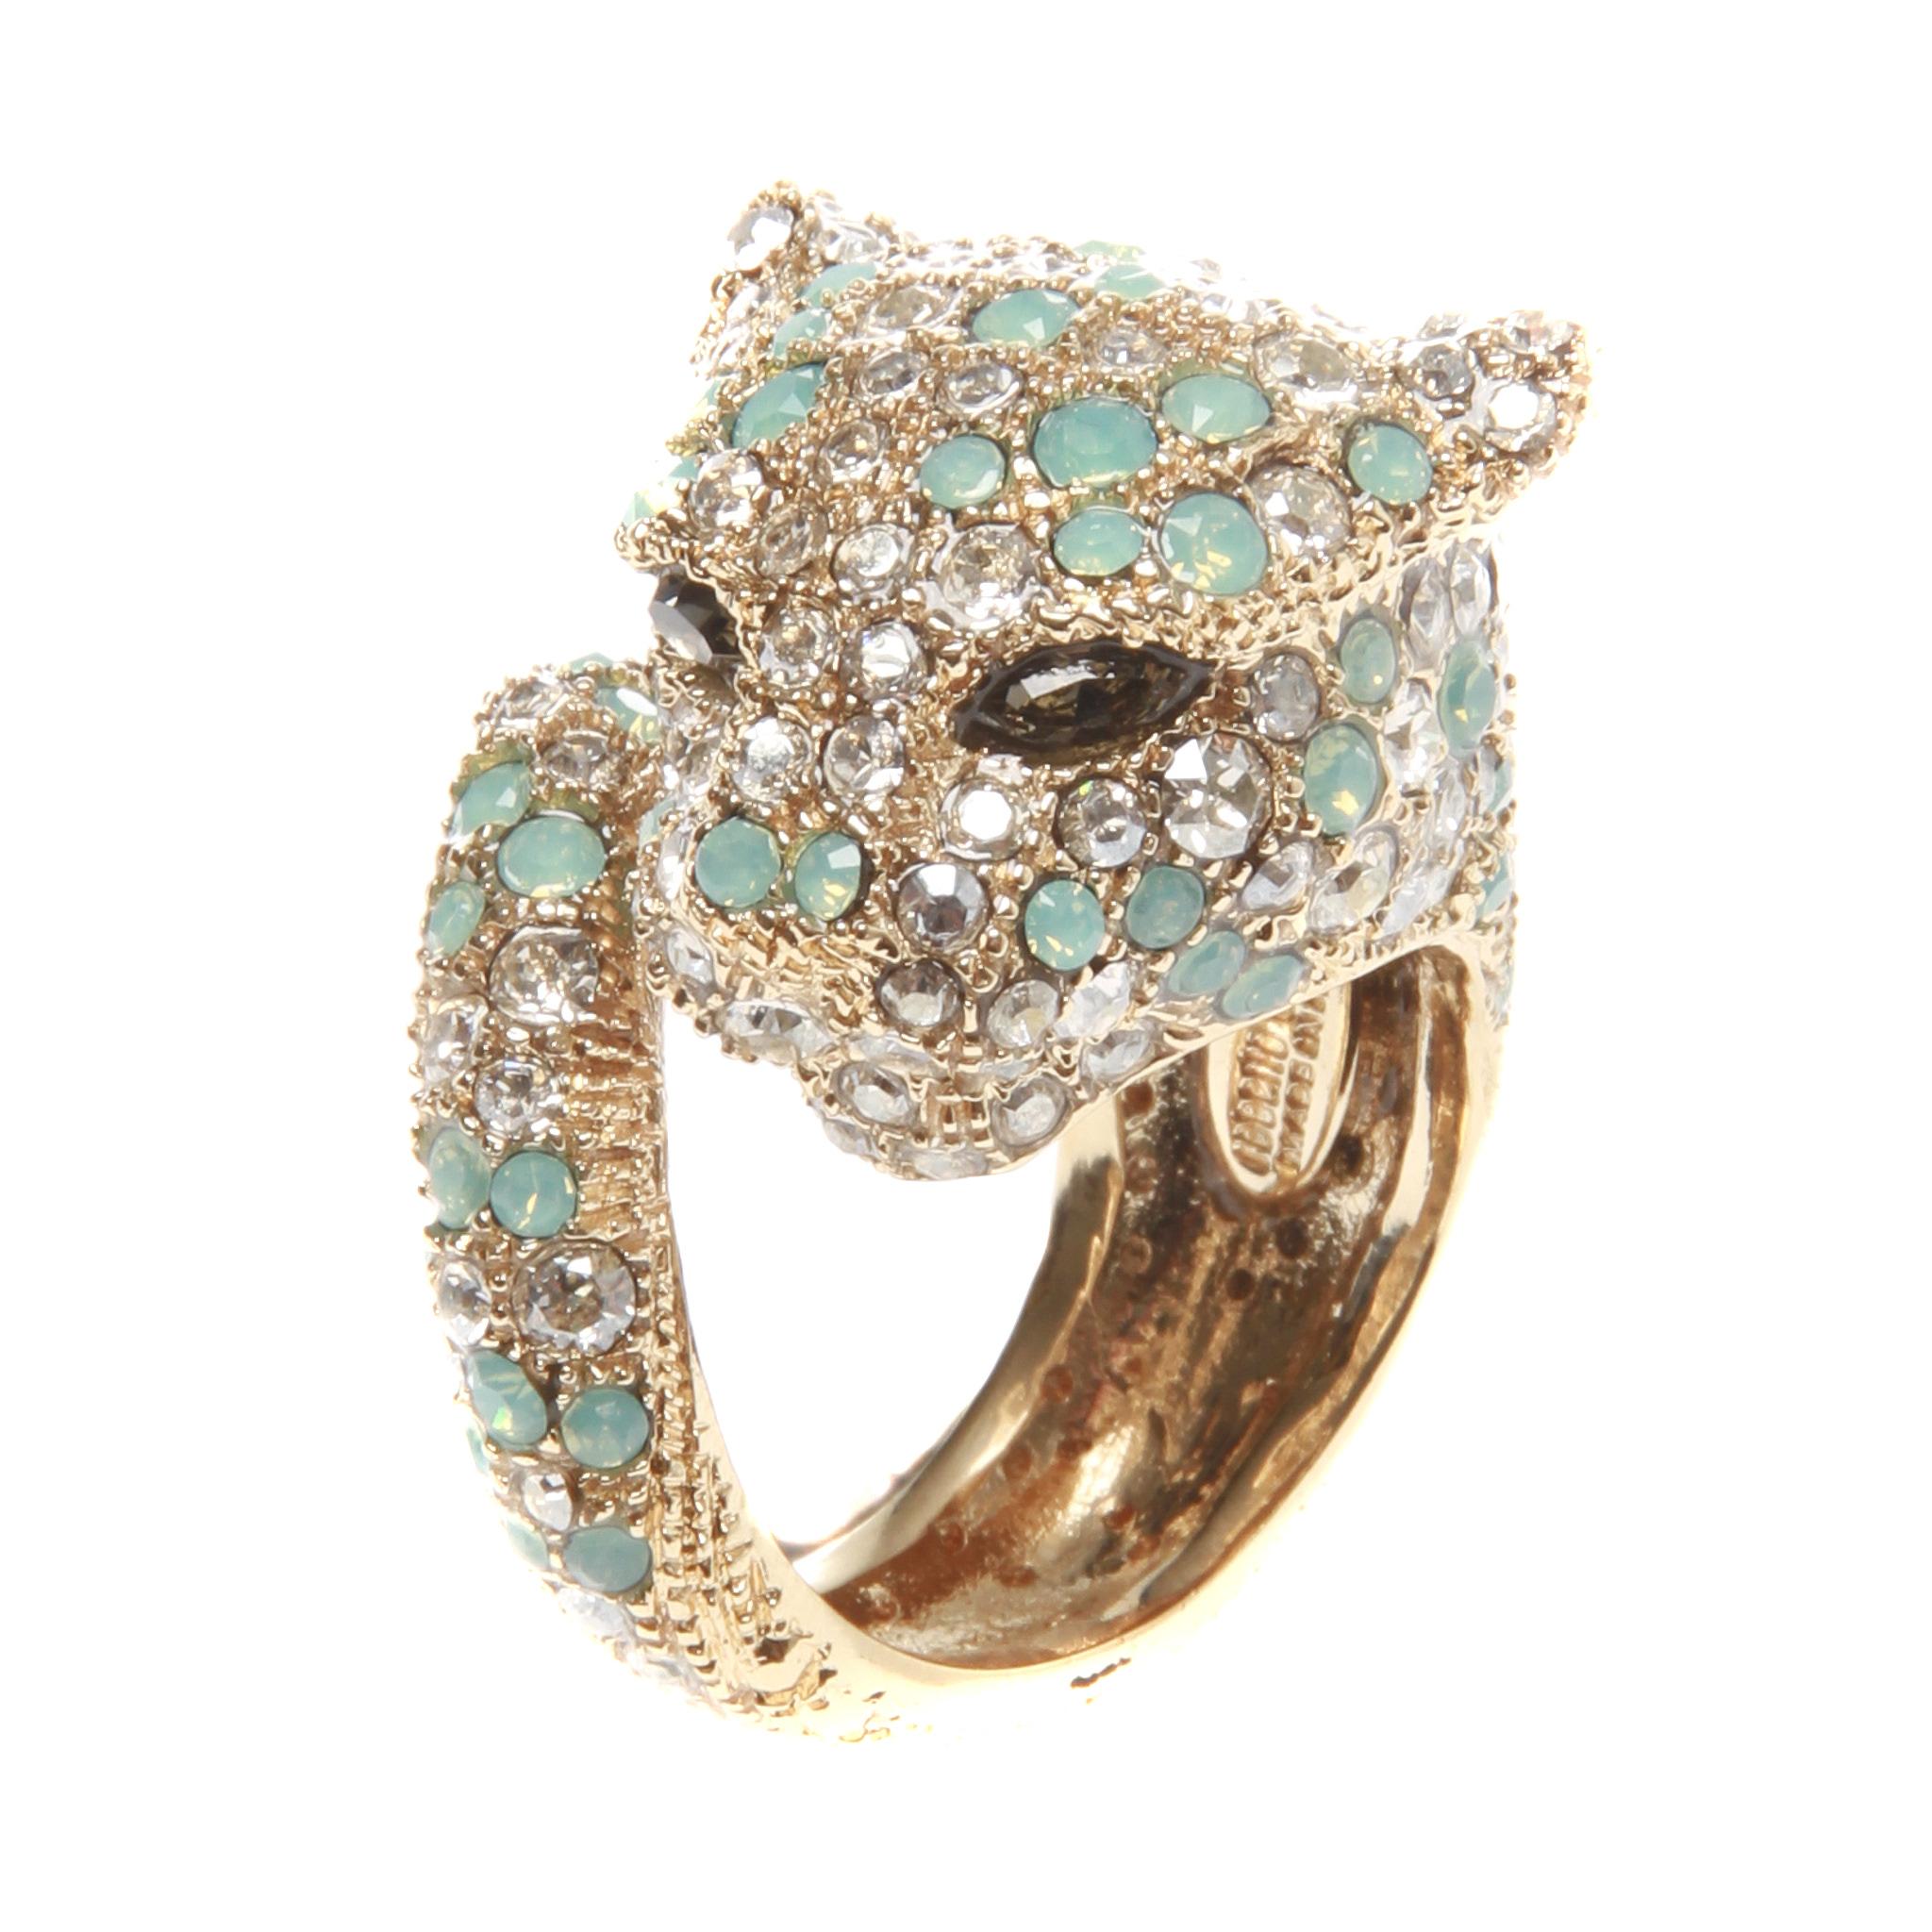 A stunning Swarovski embellished panther cocktail ring by ROBERTO CAVALLI.
Intricately crafted with turquoise, clear crystals embellished gold plated brass panther ring.
Punctuate your look with this stunning Swarovski crystal ring from ROBERTO